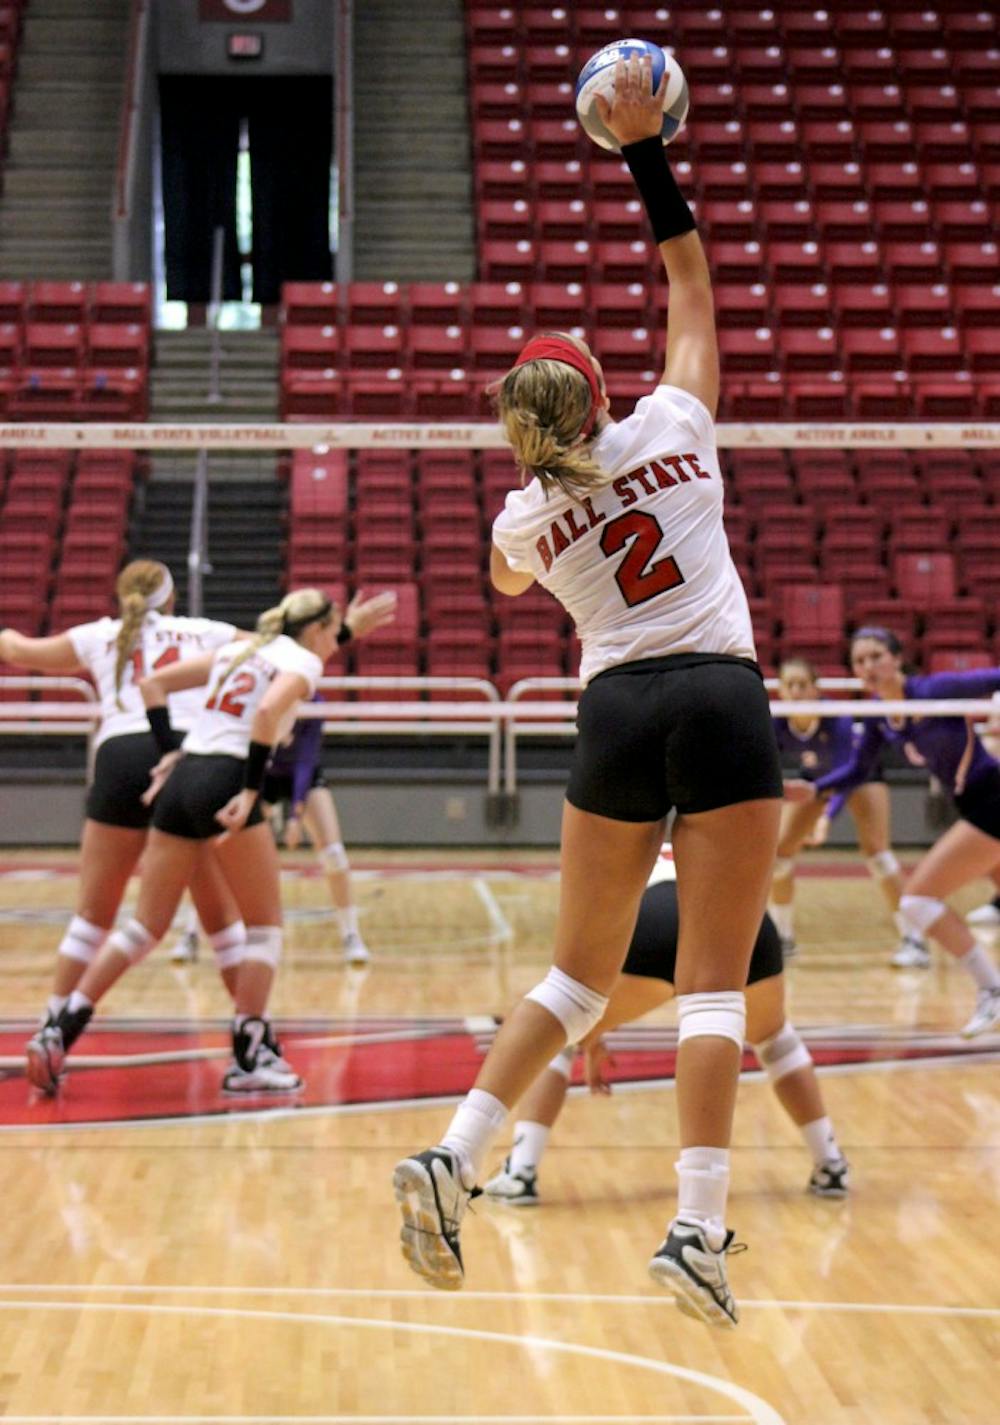 Fifth year senior outside hitter Alex Fuelling serves the ball in the first game of the Active Ankle Challenge against Albany on Aug. 28 at Worthen Arena. DN PHOTO MAKAYLA JOHNSON